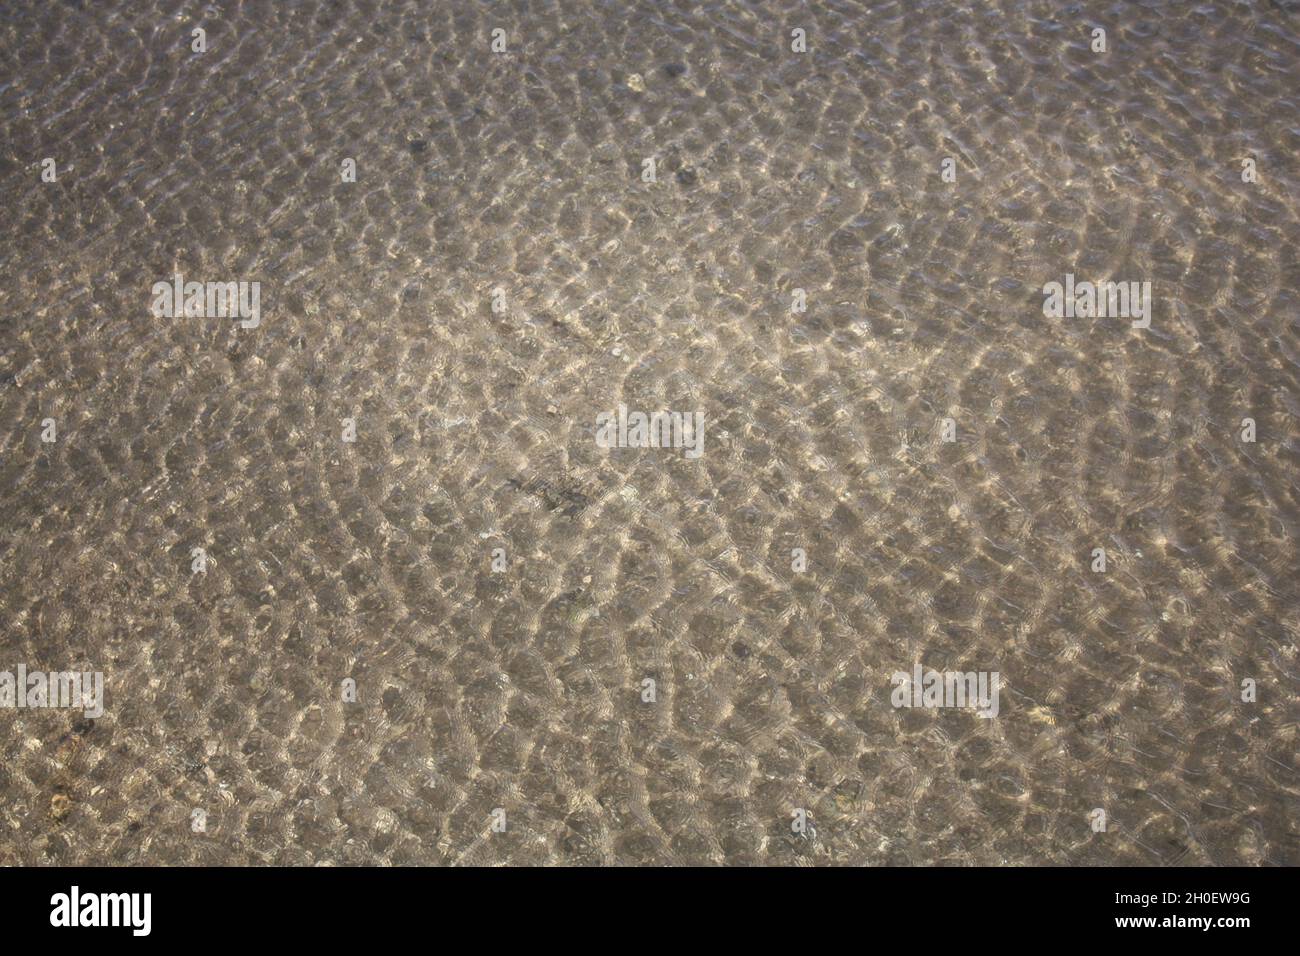 Texture of the water in Scotland, with ripples and light refractions. Stock Photo